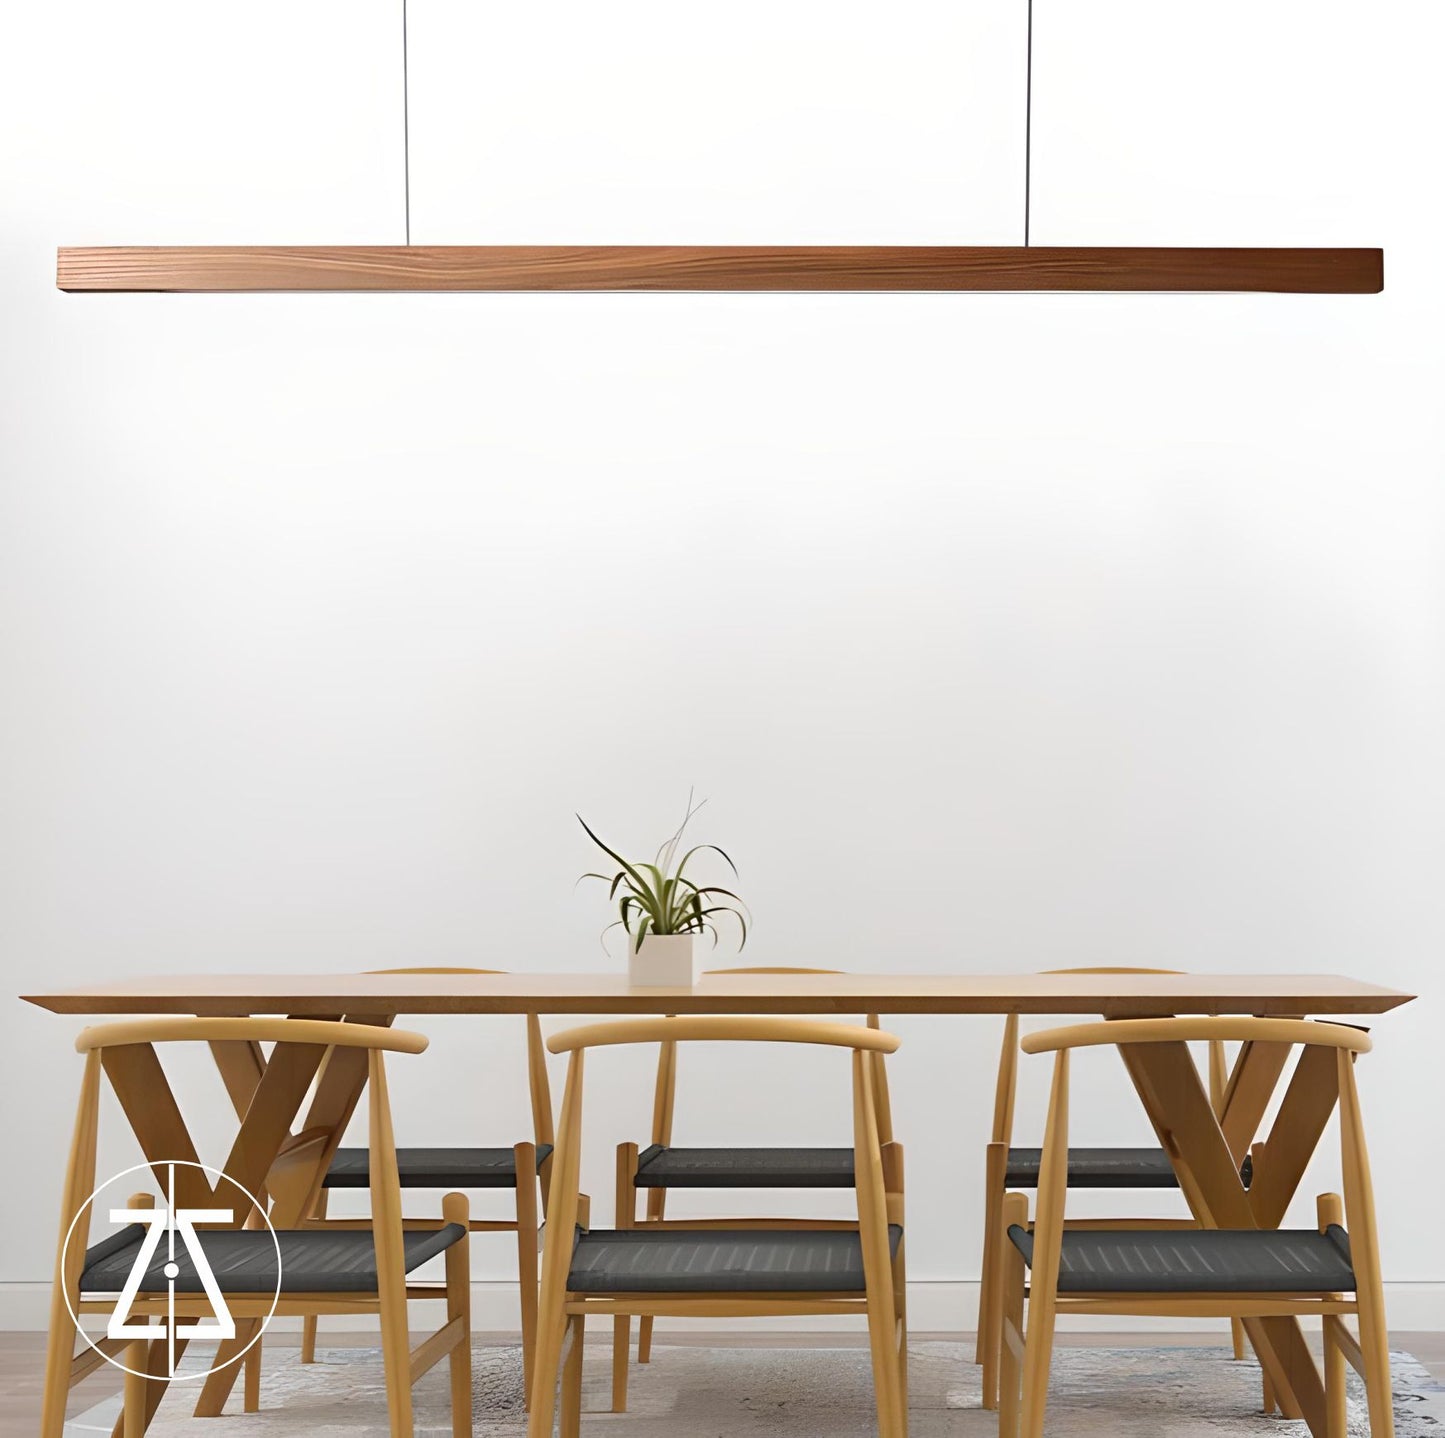 Zeibeck Wood 4x8cm WI-FI Controlled Single Color Pendant Lighting